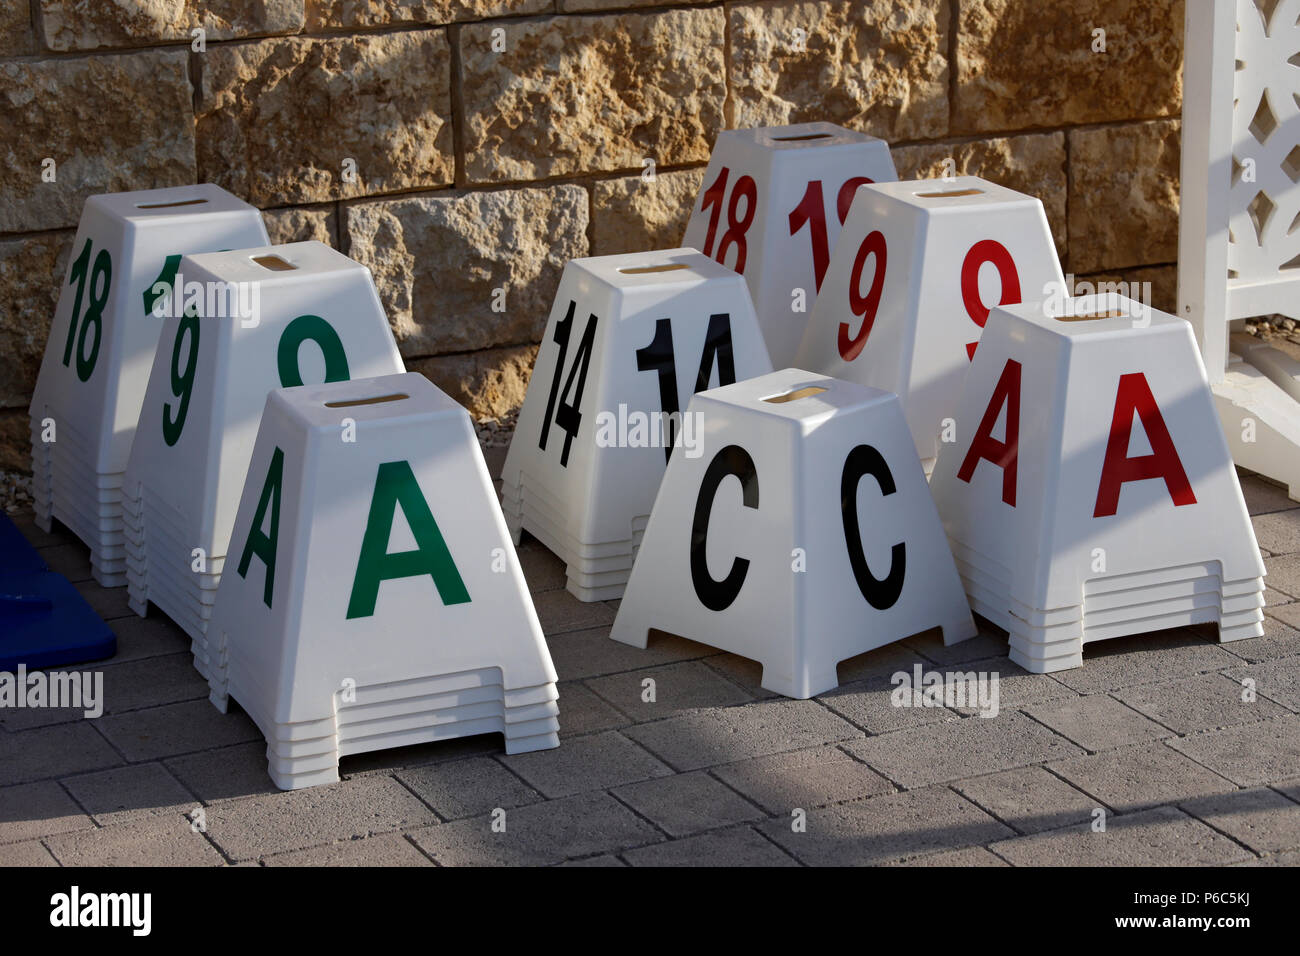 Doha, dressage letter cones and obstacle numbers Stock Photo